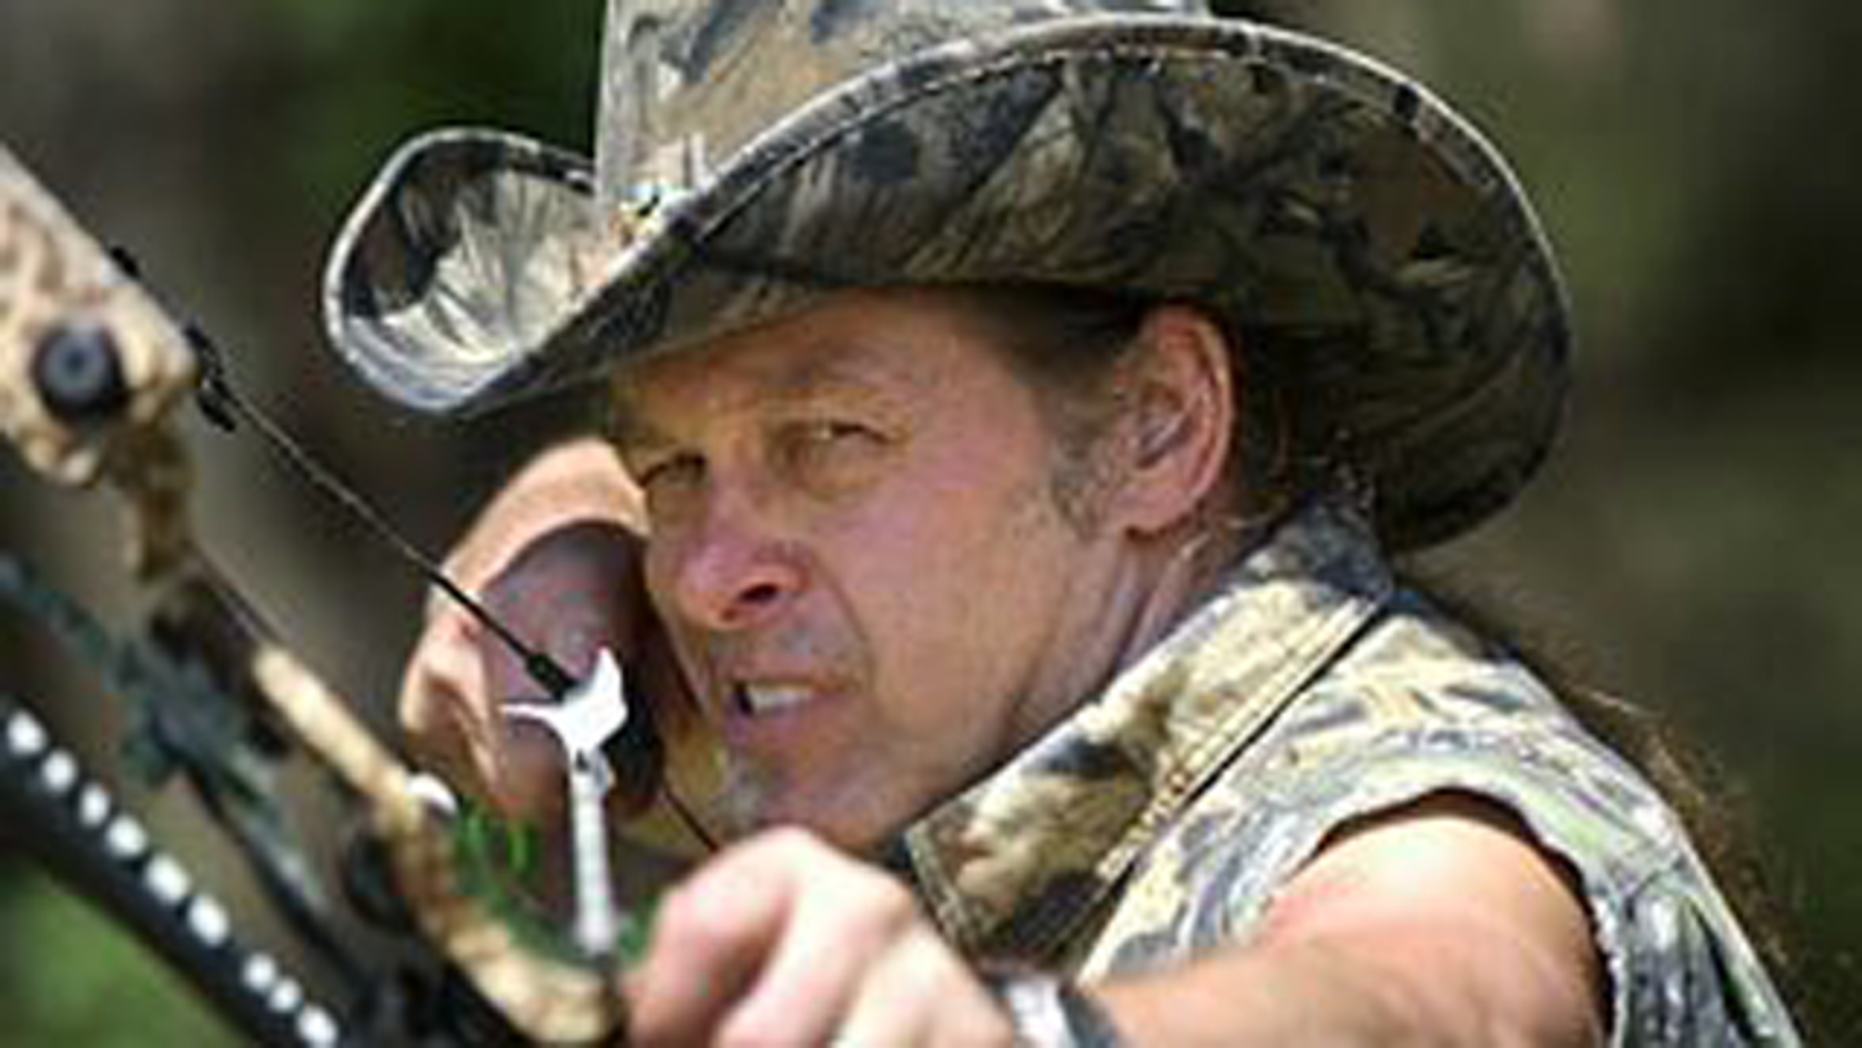 ted nugent heads will roll